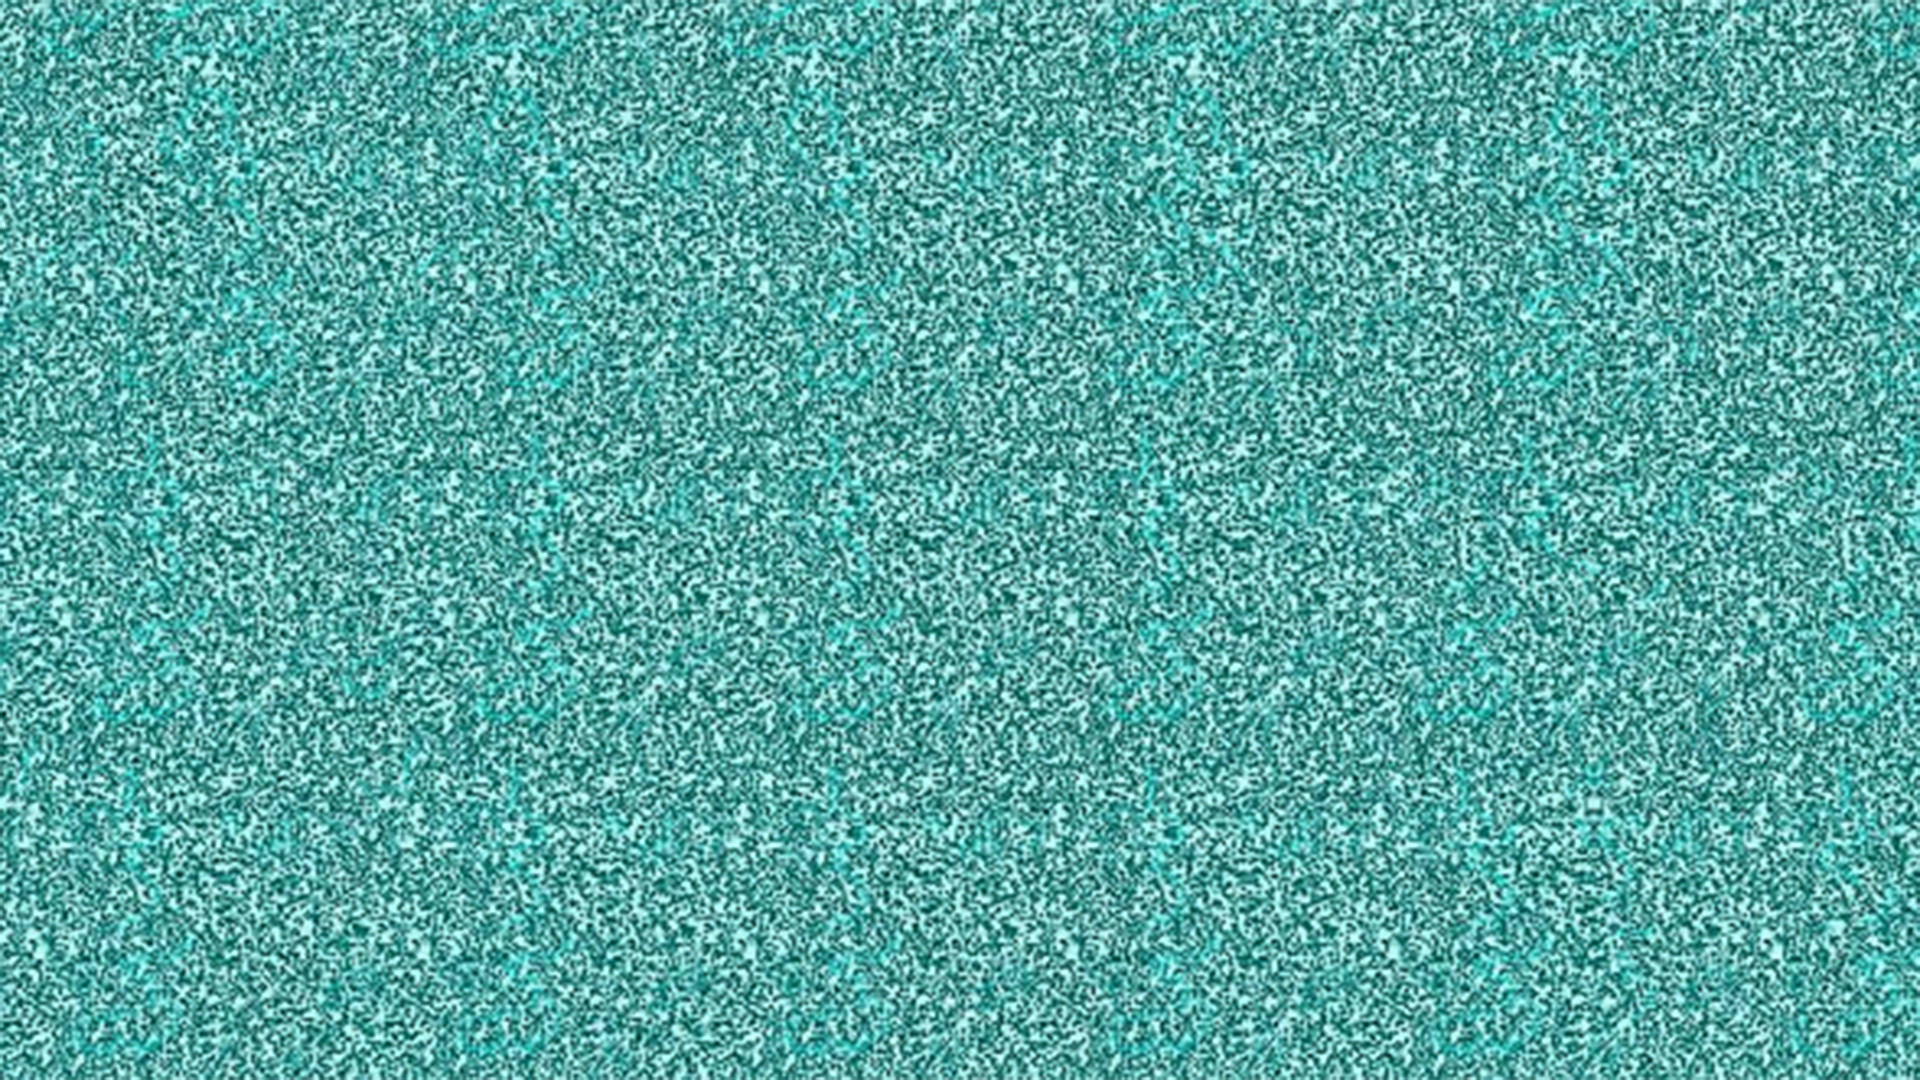 1920x1080 Blake Lively shares Magic Eye illusion on Instagram (to promote her new  movie, 'The Shallows') - TODAY.com